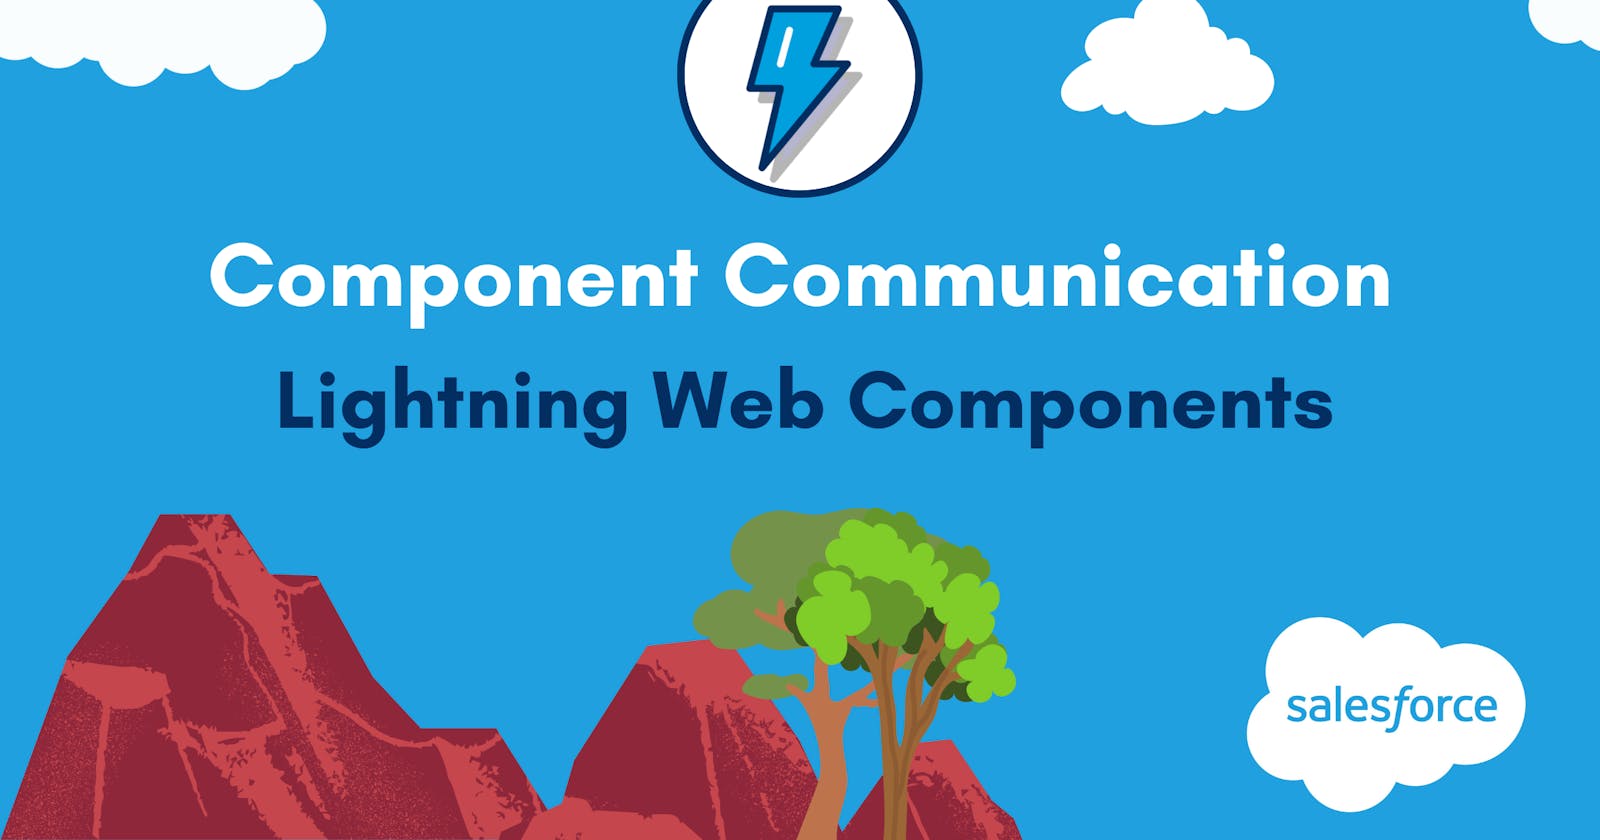 Component Communication in LWC